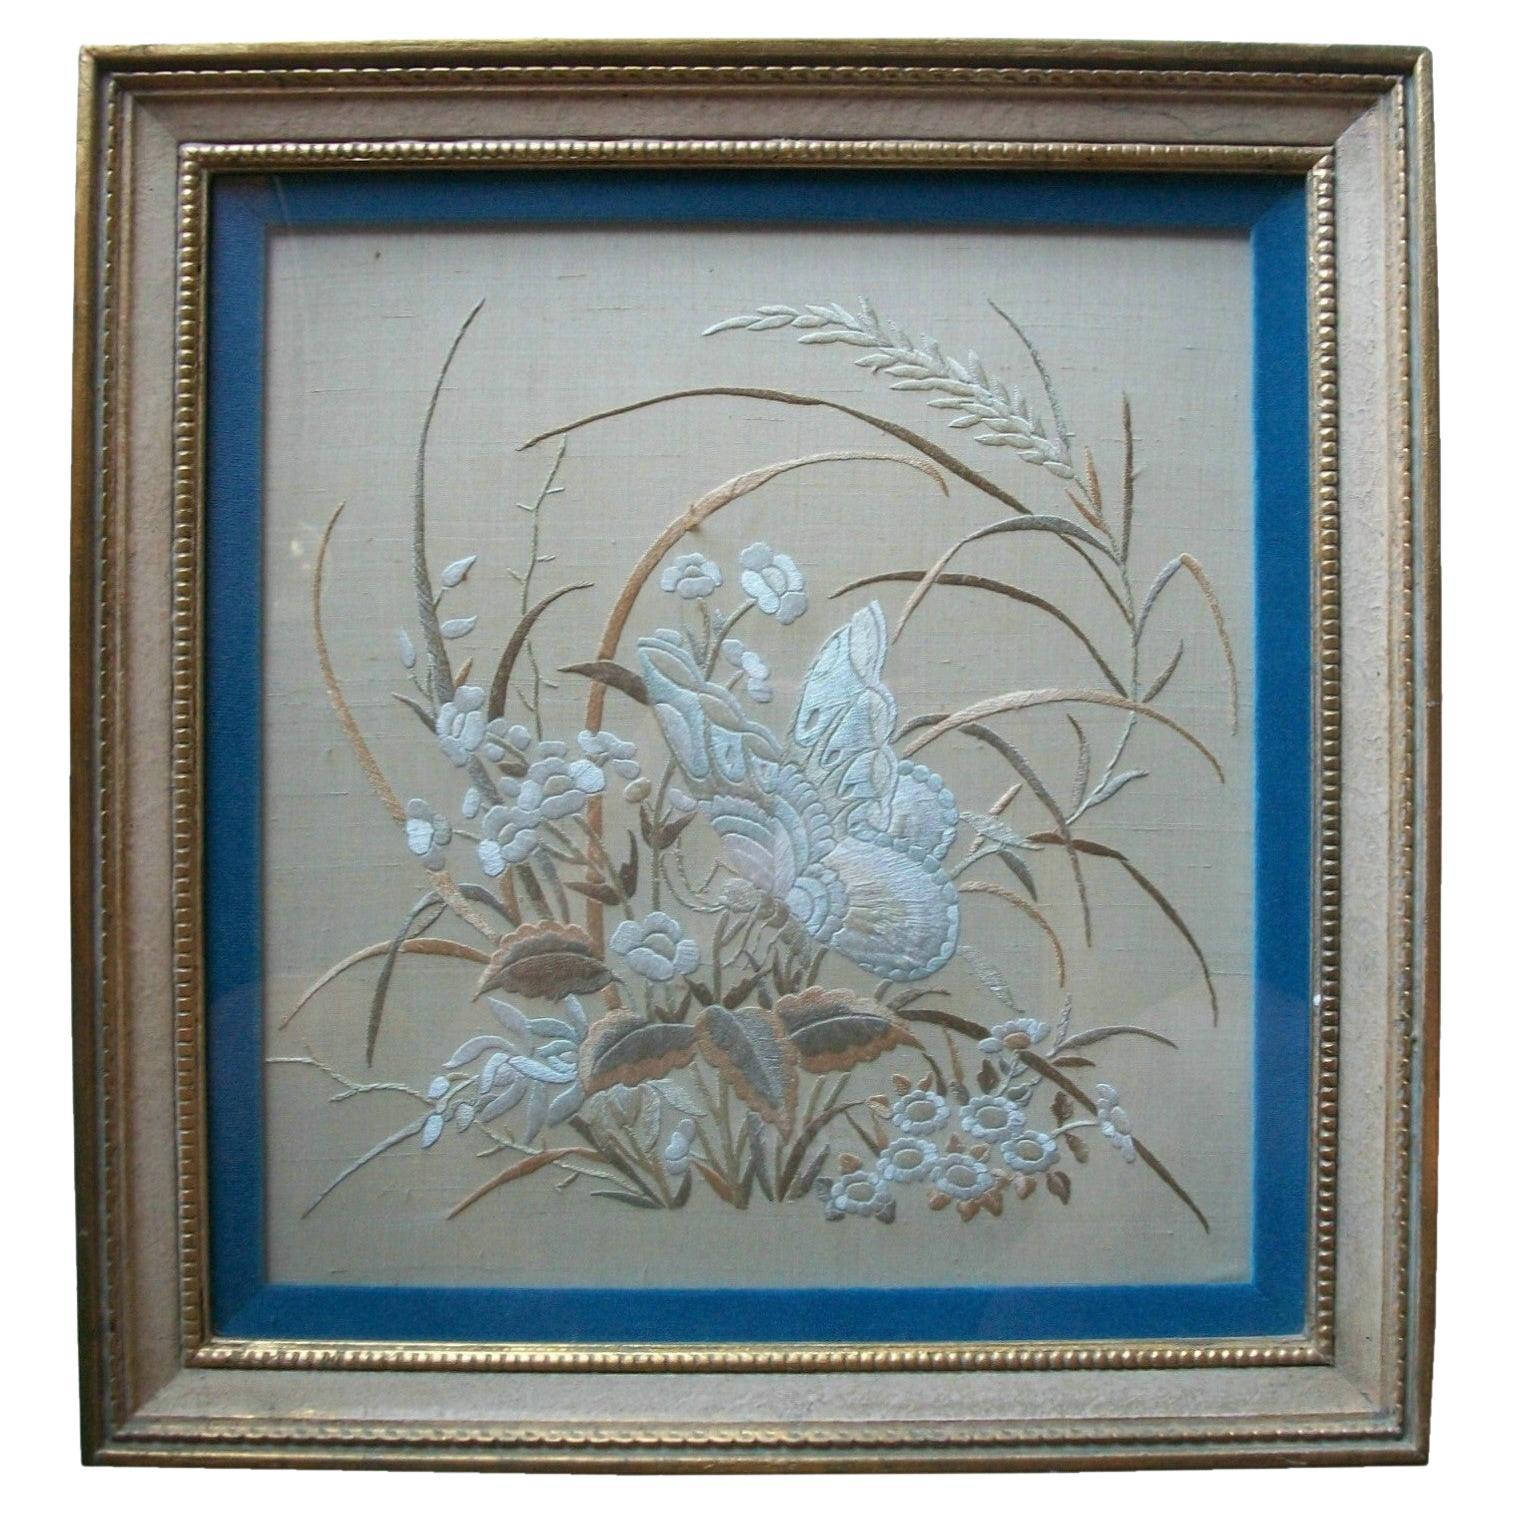 Vintage Asian Embroidery on Silk - Custom Frame - Unsigned - Mid 20th Century